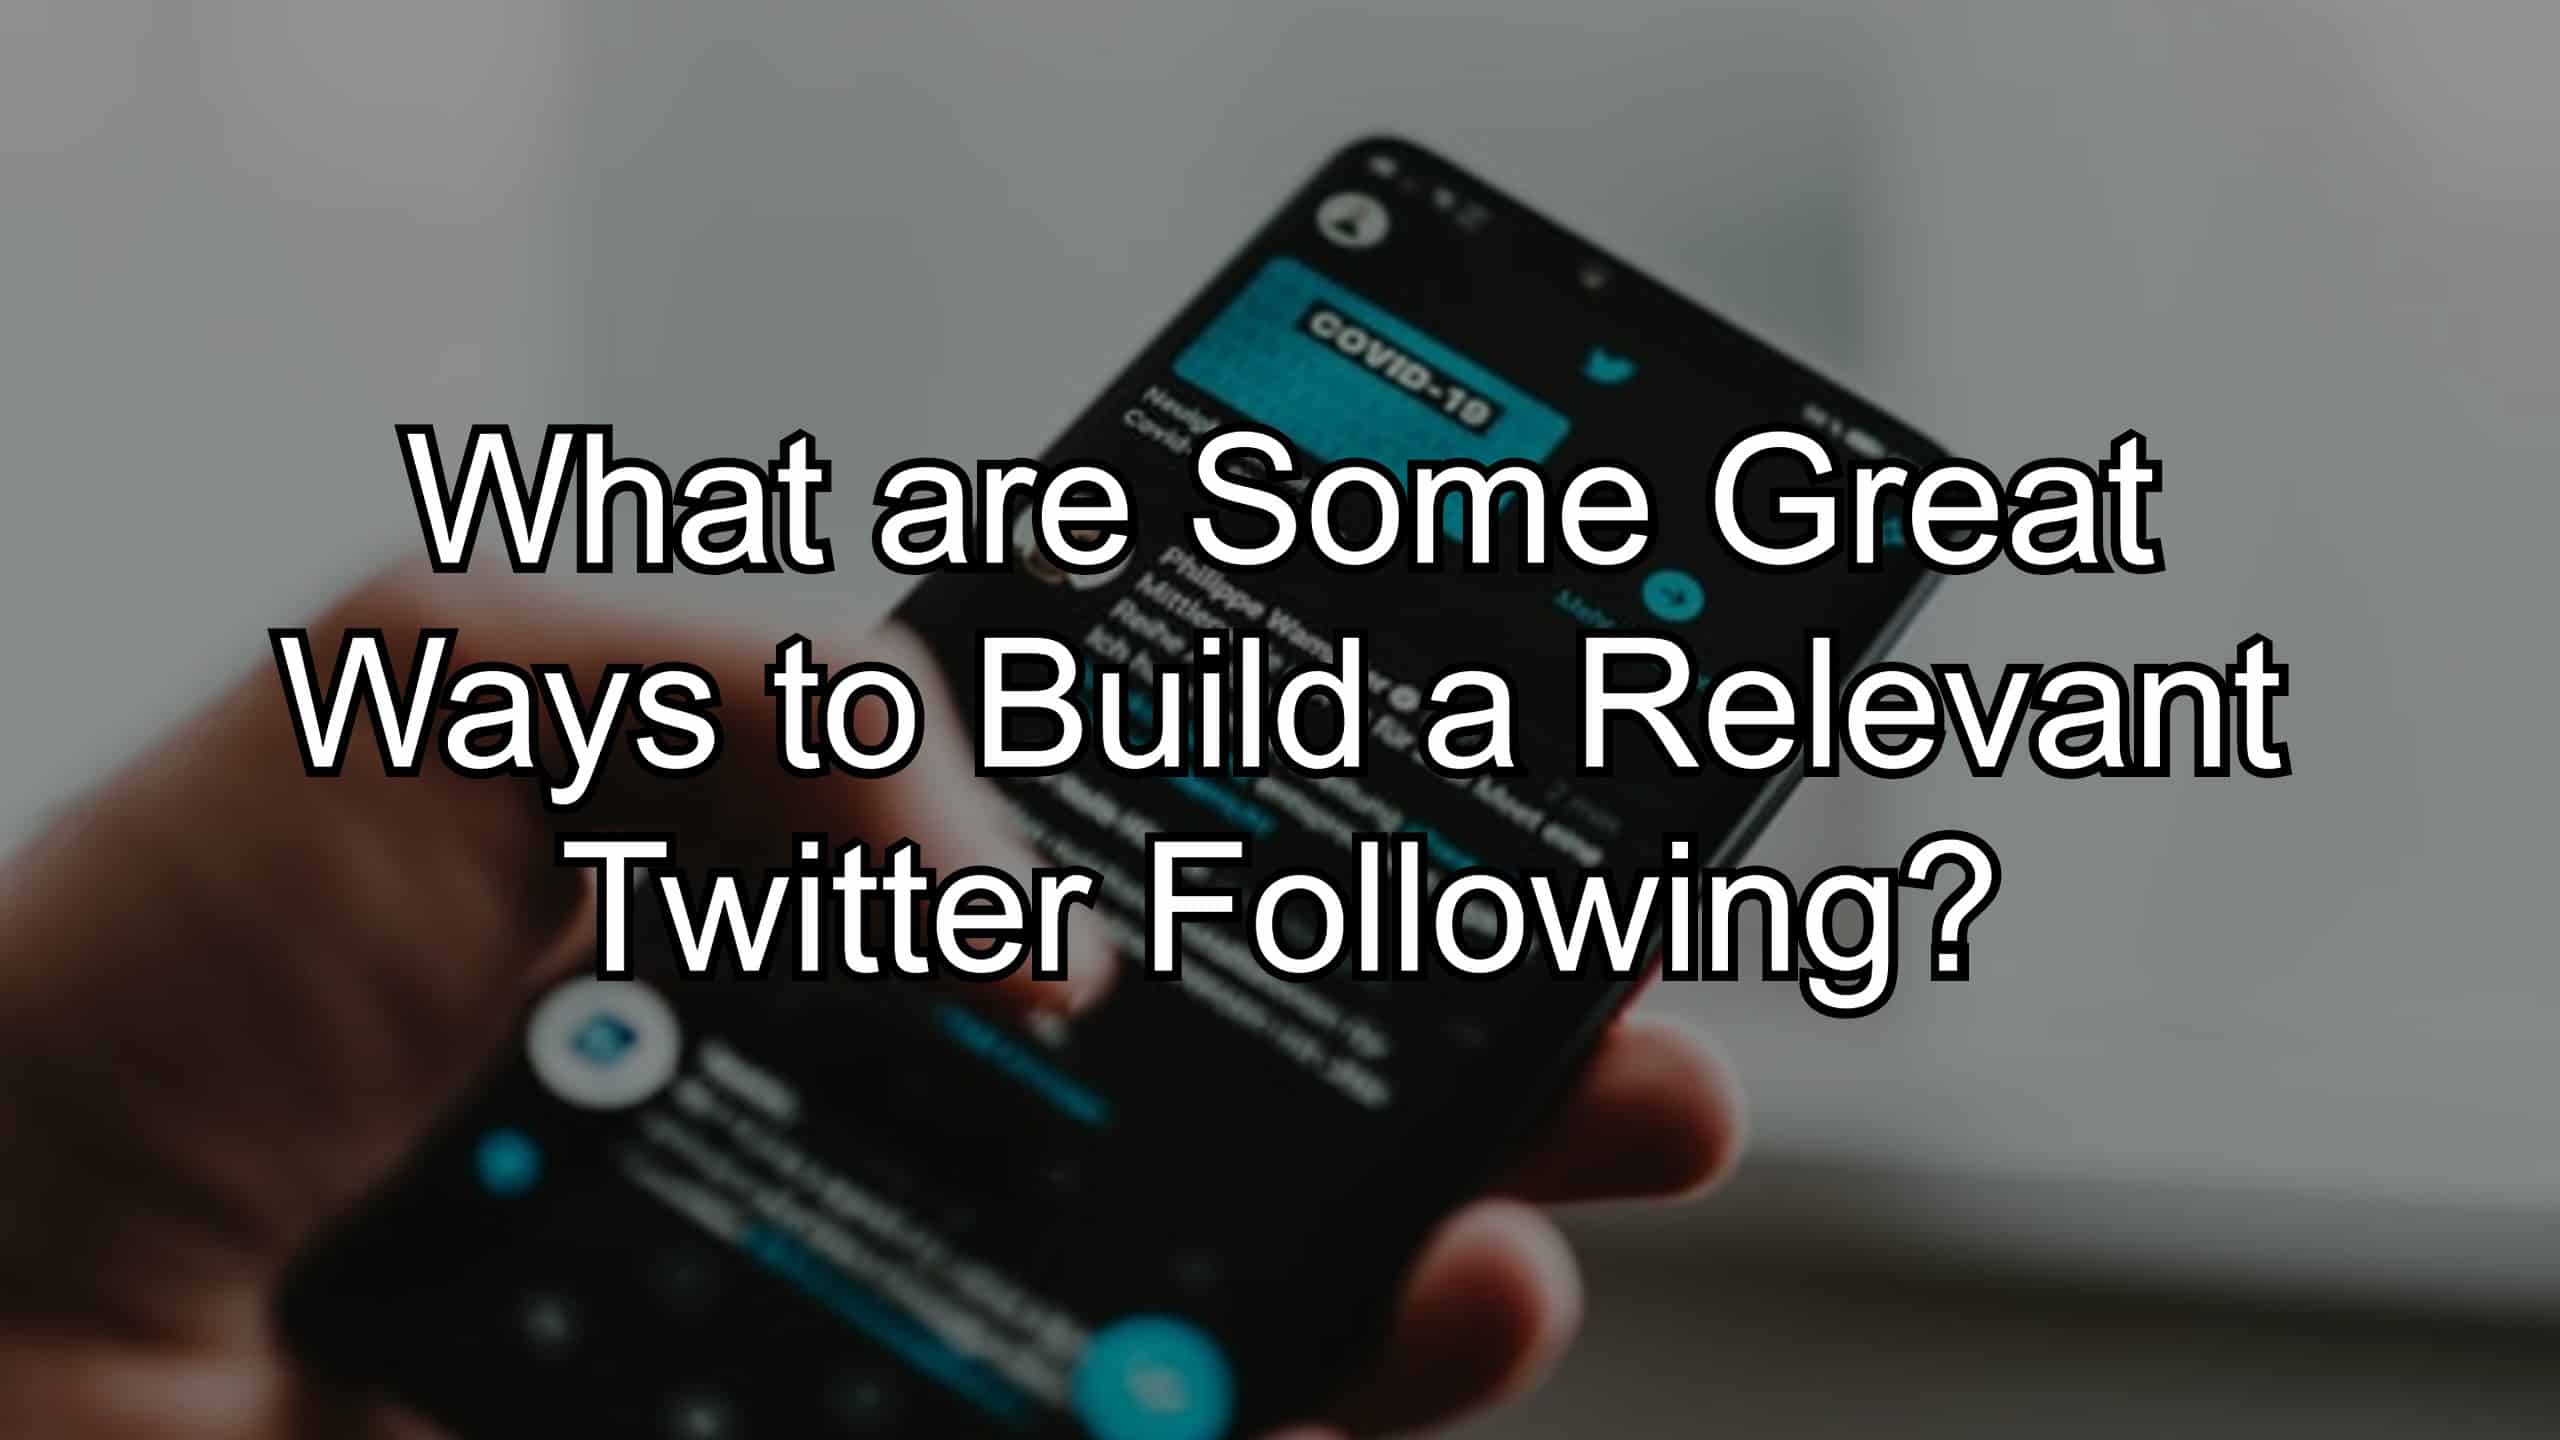 What are Some Great Ways to Build a Relevant Twitter Following?